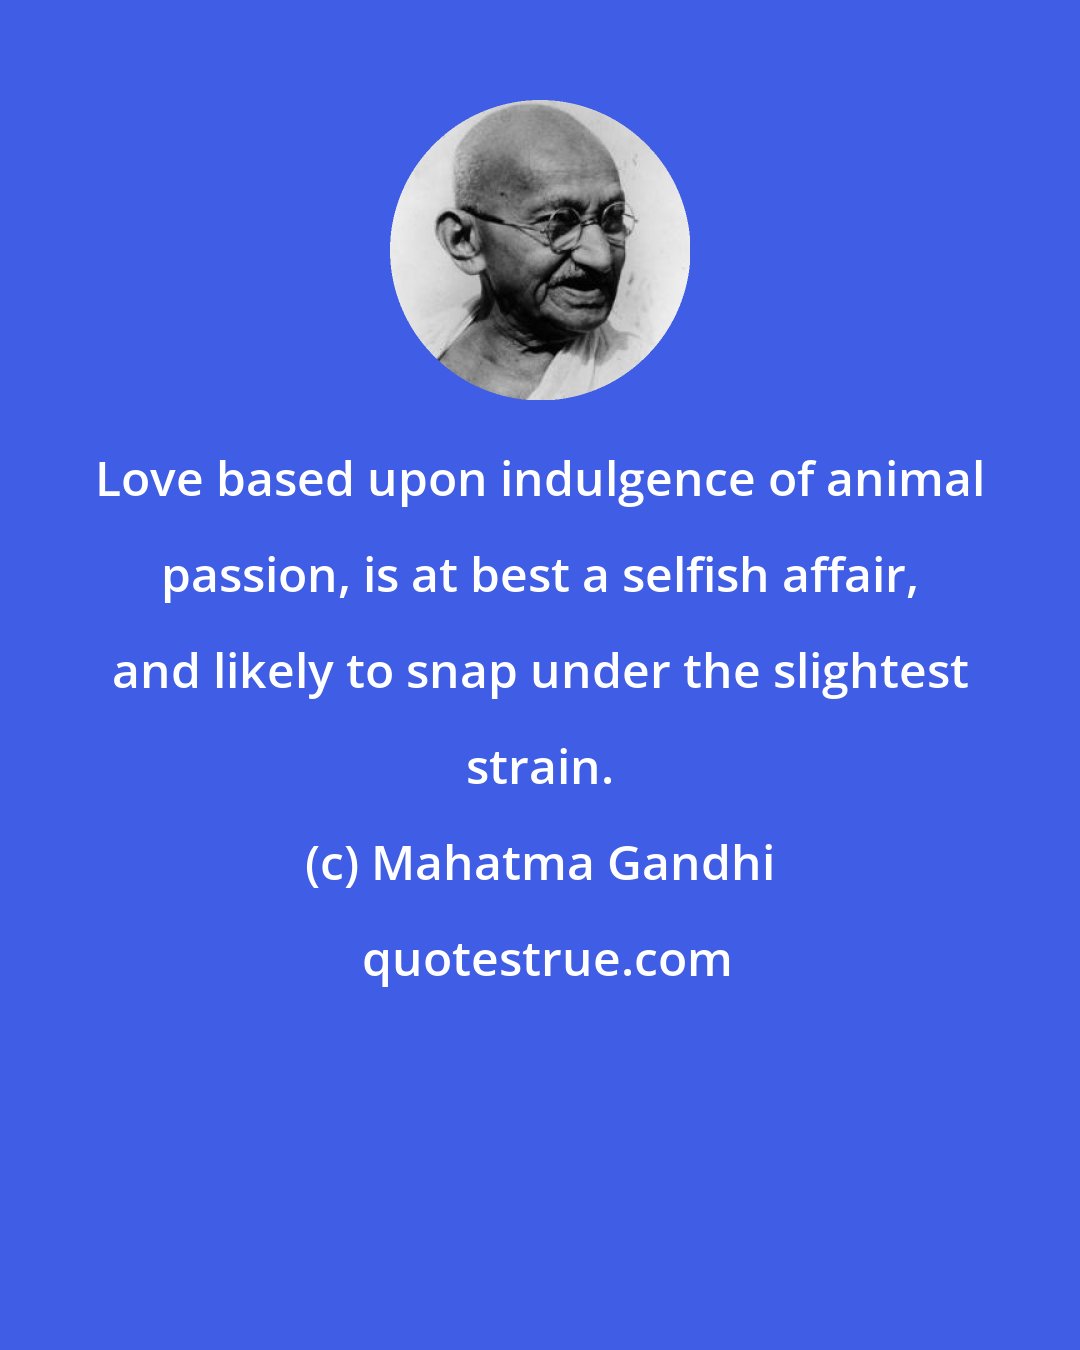 Mahatma Gandhi: Love based upon indulgence of animal passion, is at best a selfish affair, and likely to snap under the slightest strain.